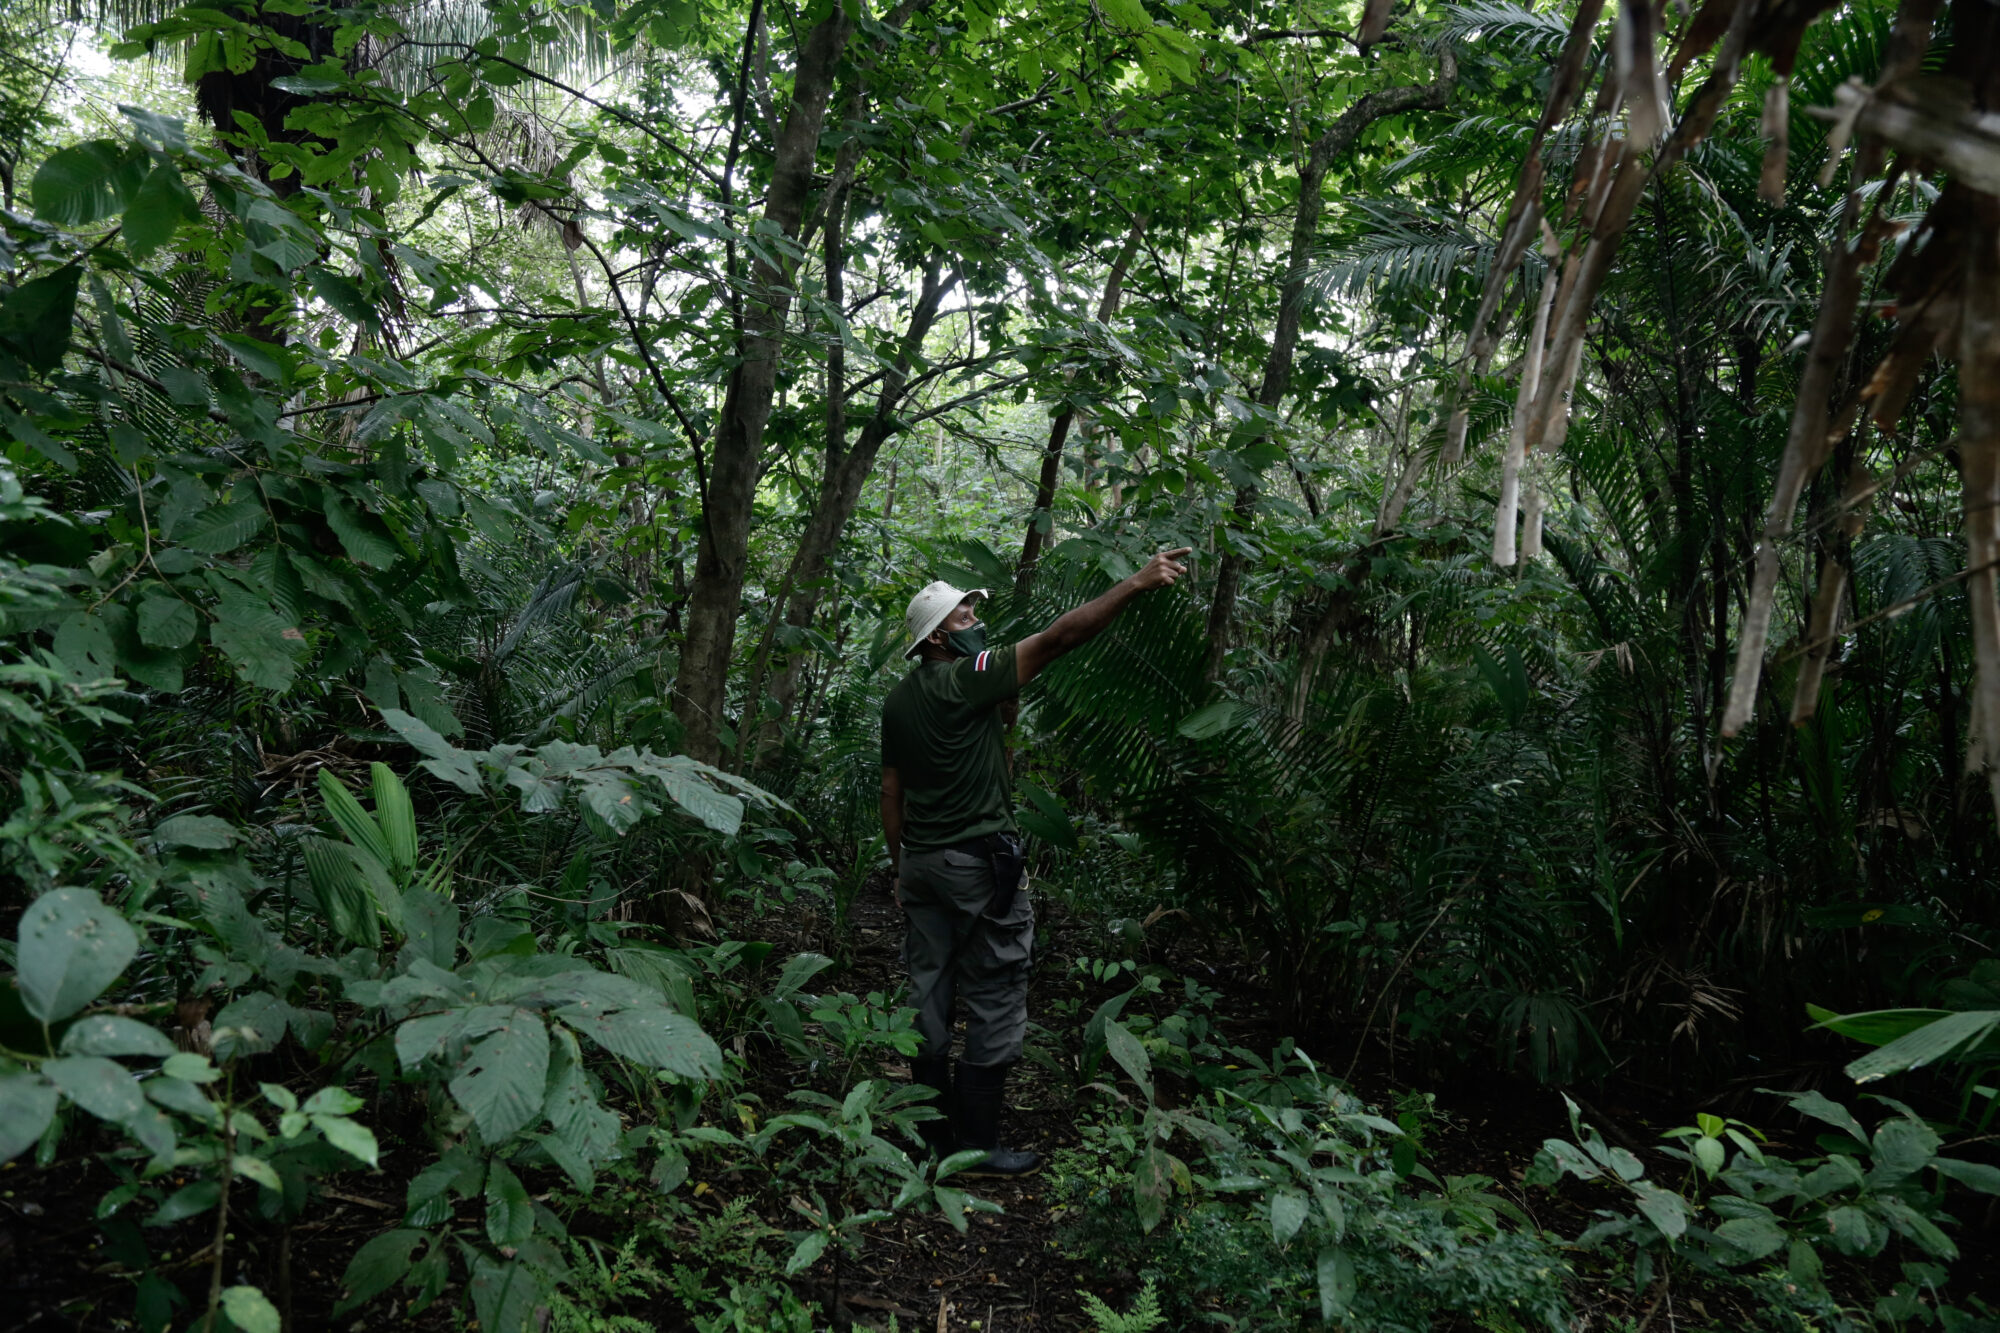 Park ranger in a forest in Costa Rica